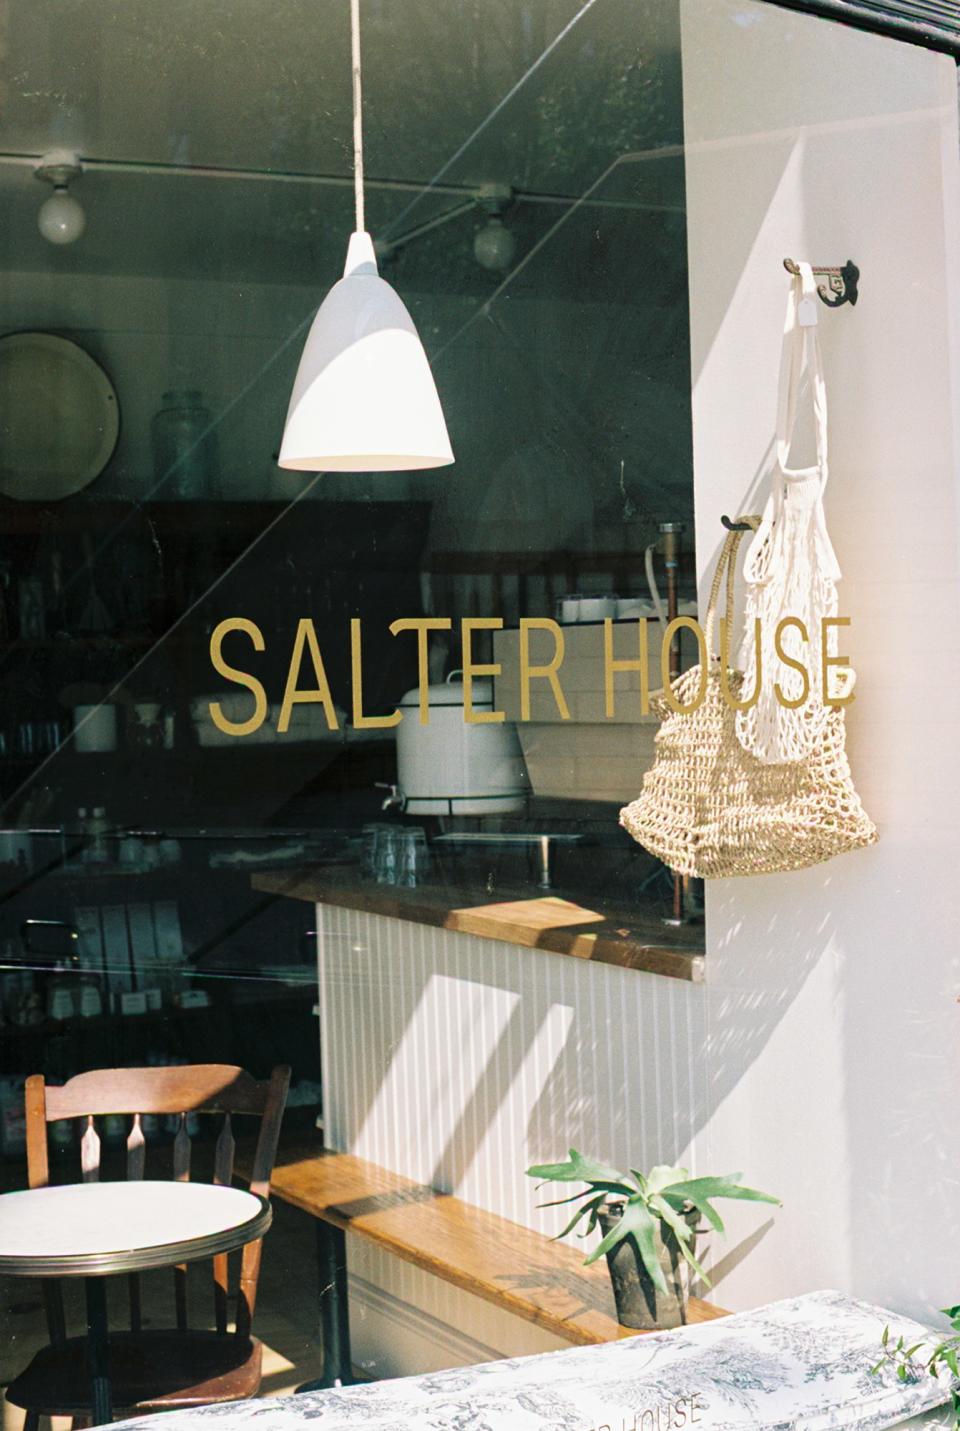 Adjacent to Picture Room, Salter House operates as a metaphorical corollary as well. If Picture Room presents art as you might actually hang it in your halls, Salter House will bring an artistic refinement to the items that line your kitchen cabinets.